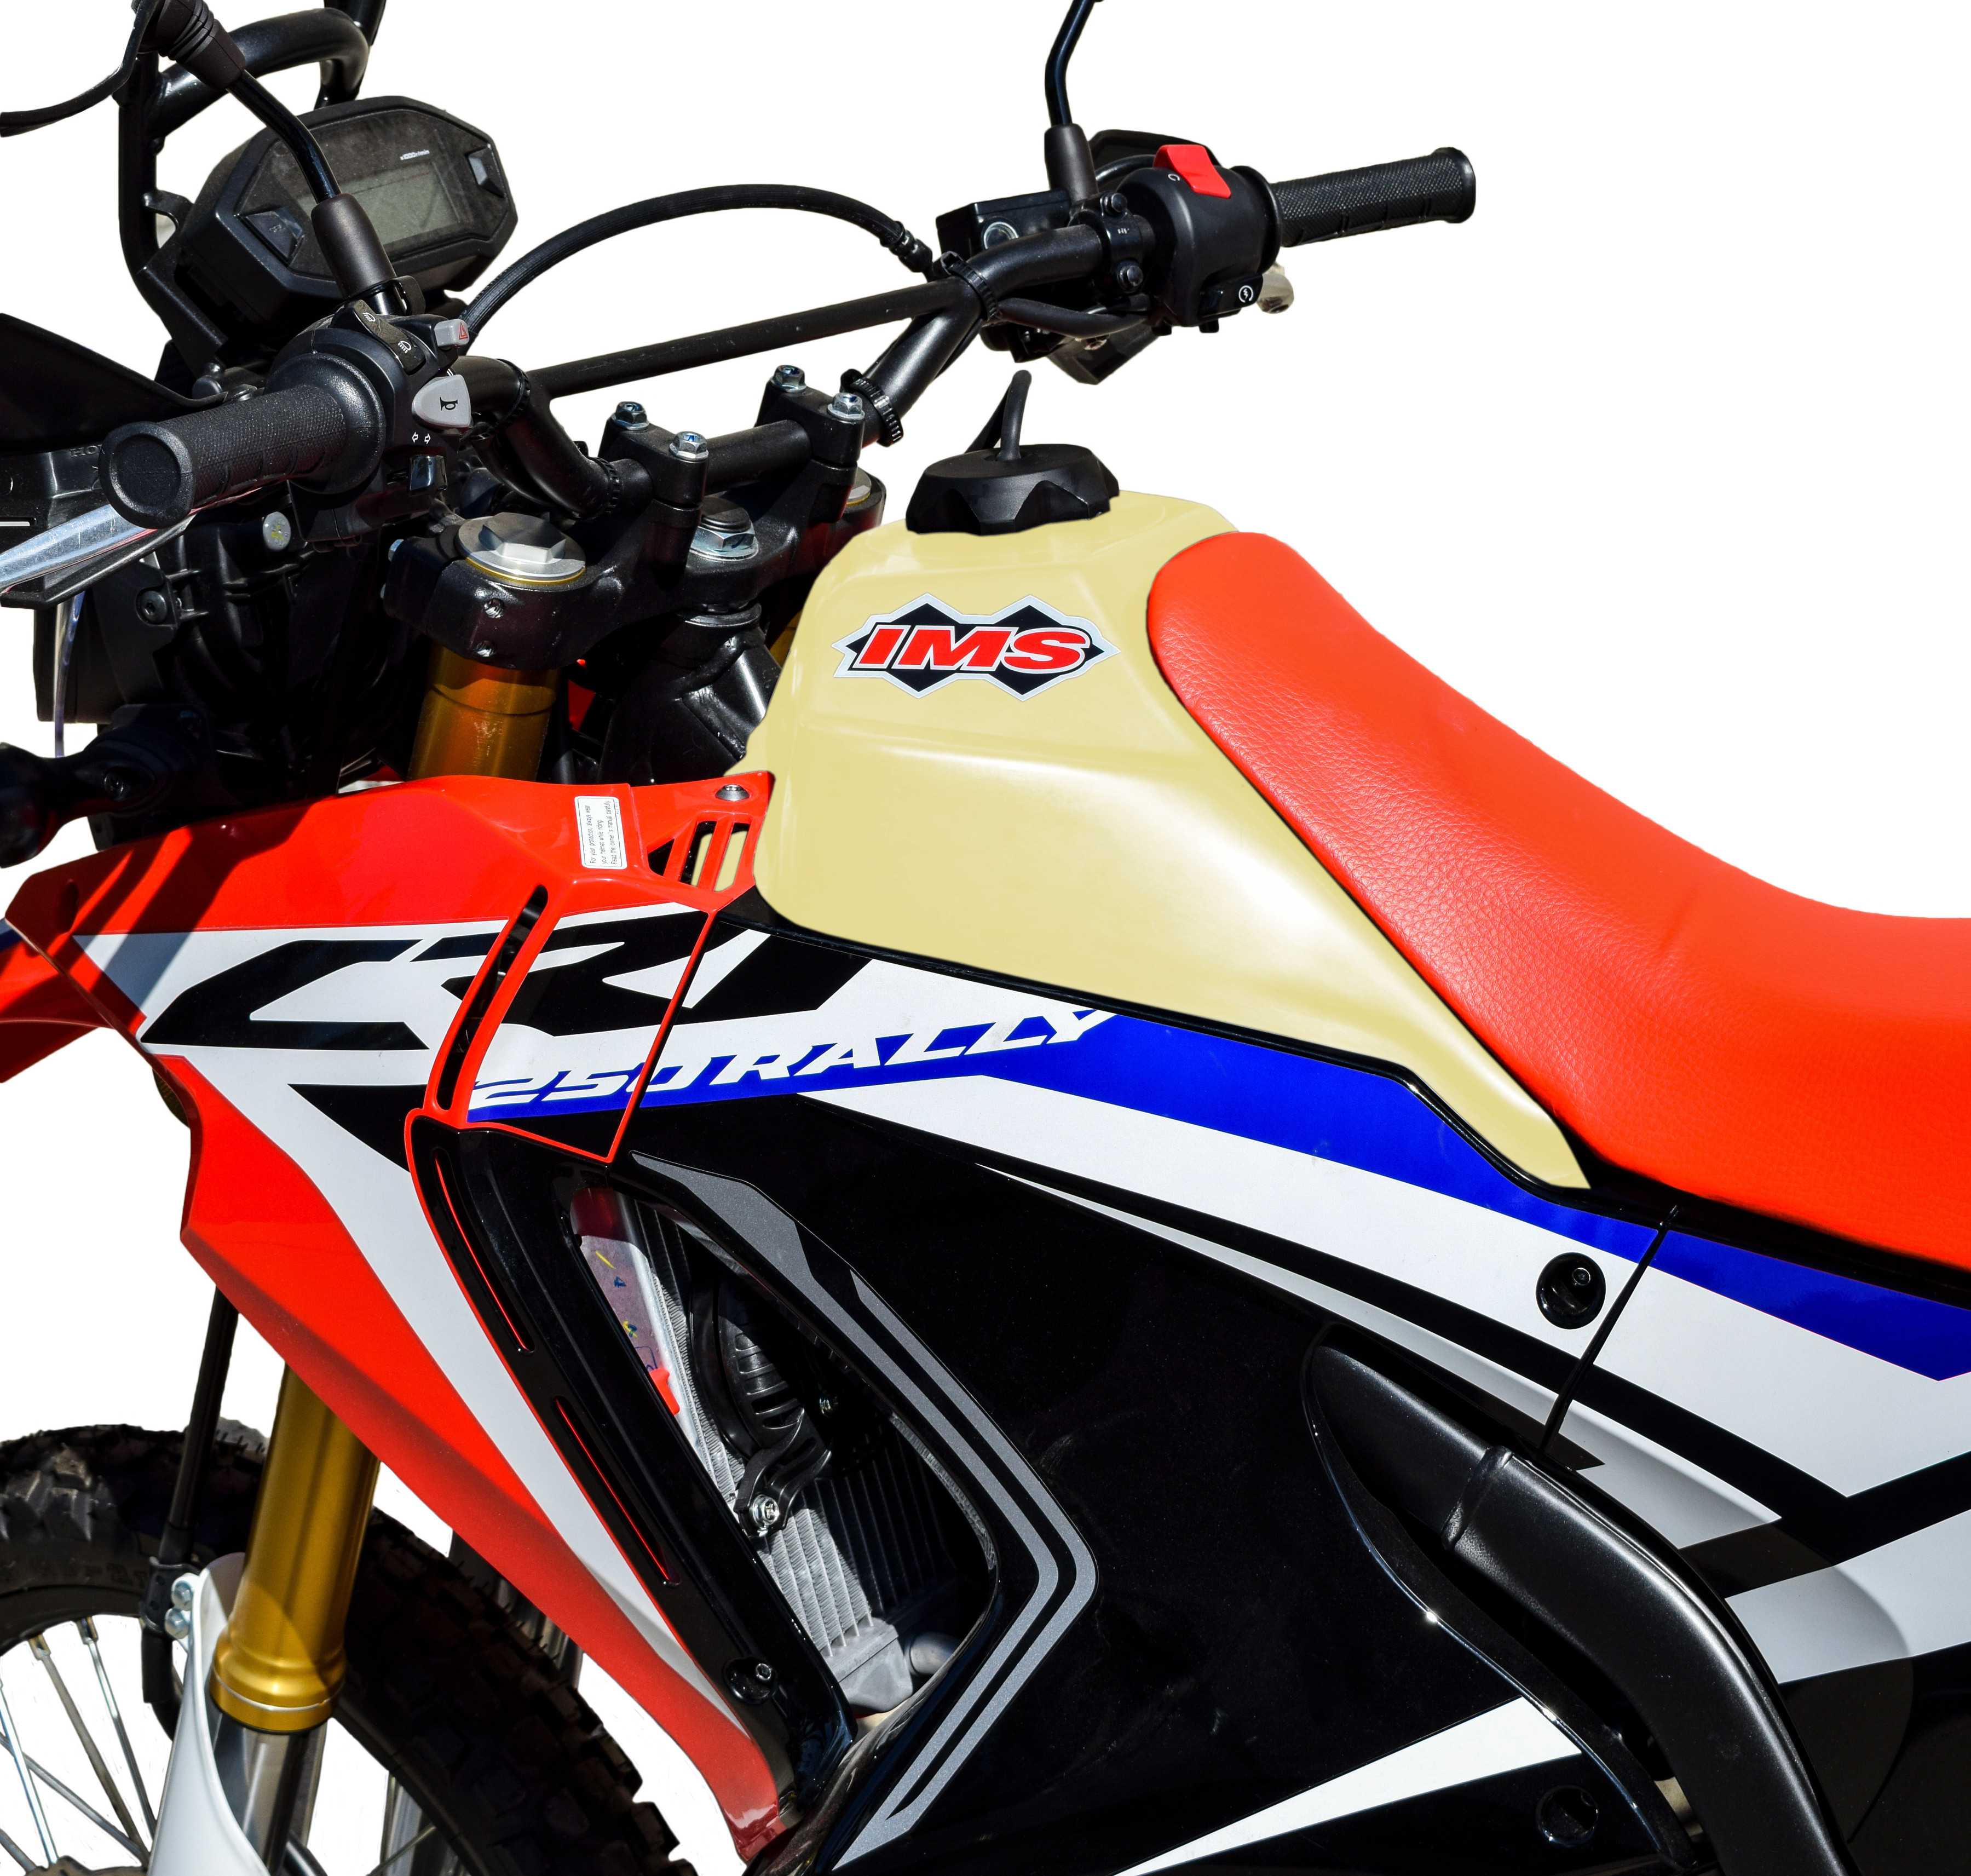 Large Capacity Fuel Tank 3.5 Gallon Natural - For 17-19 CRF250L Rally - Click Image to Close